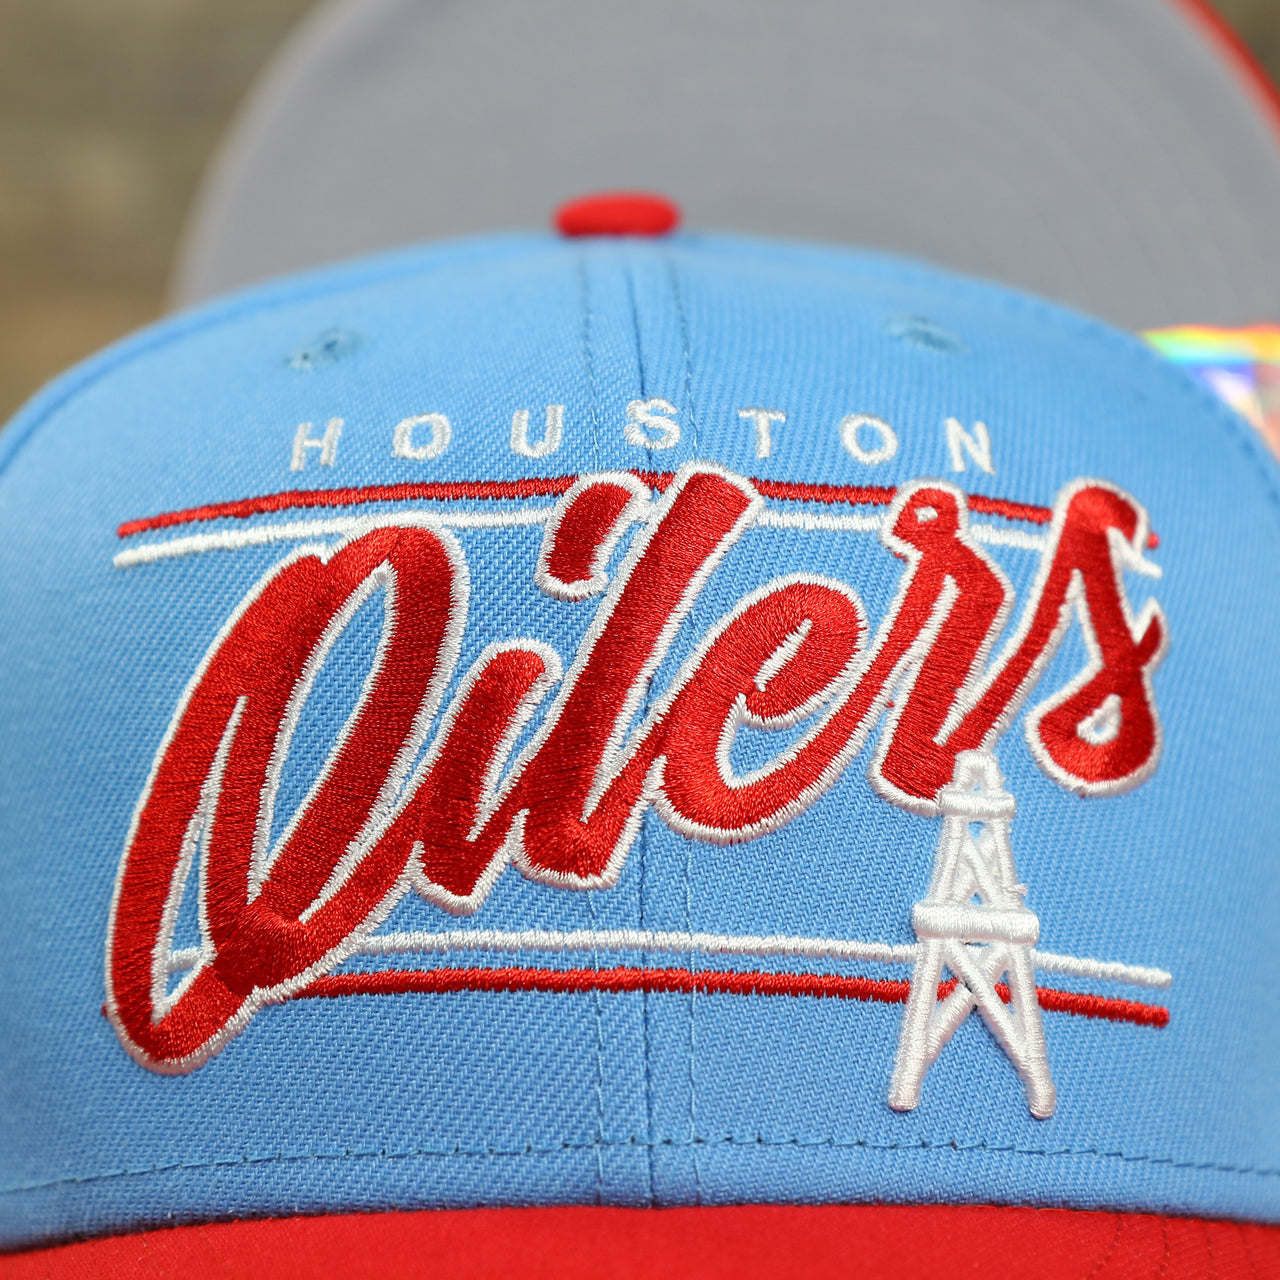 oilers logo on the Houston Oilers Vintage "Team Script" College Bar Gray UV 9Fifty Snapback | Light Blue/Rd 9Fifty Snapback Hat